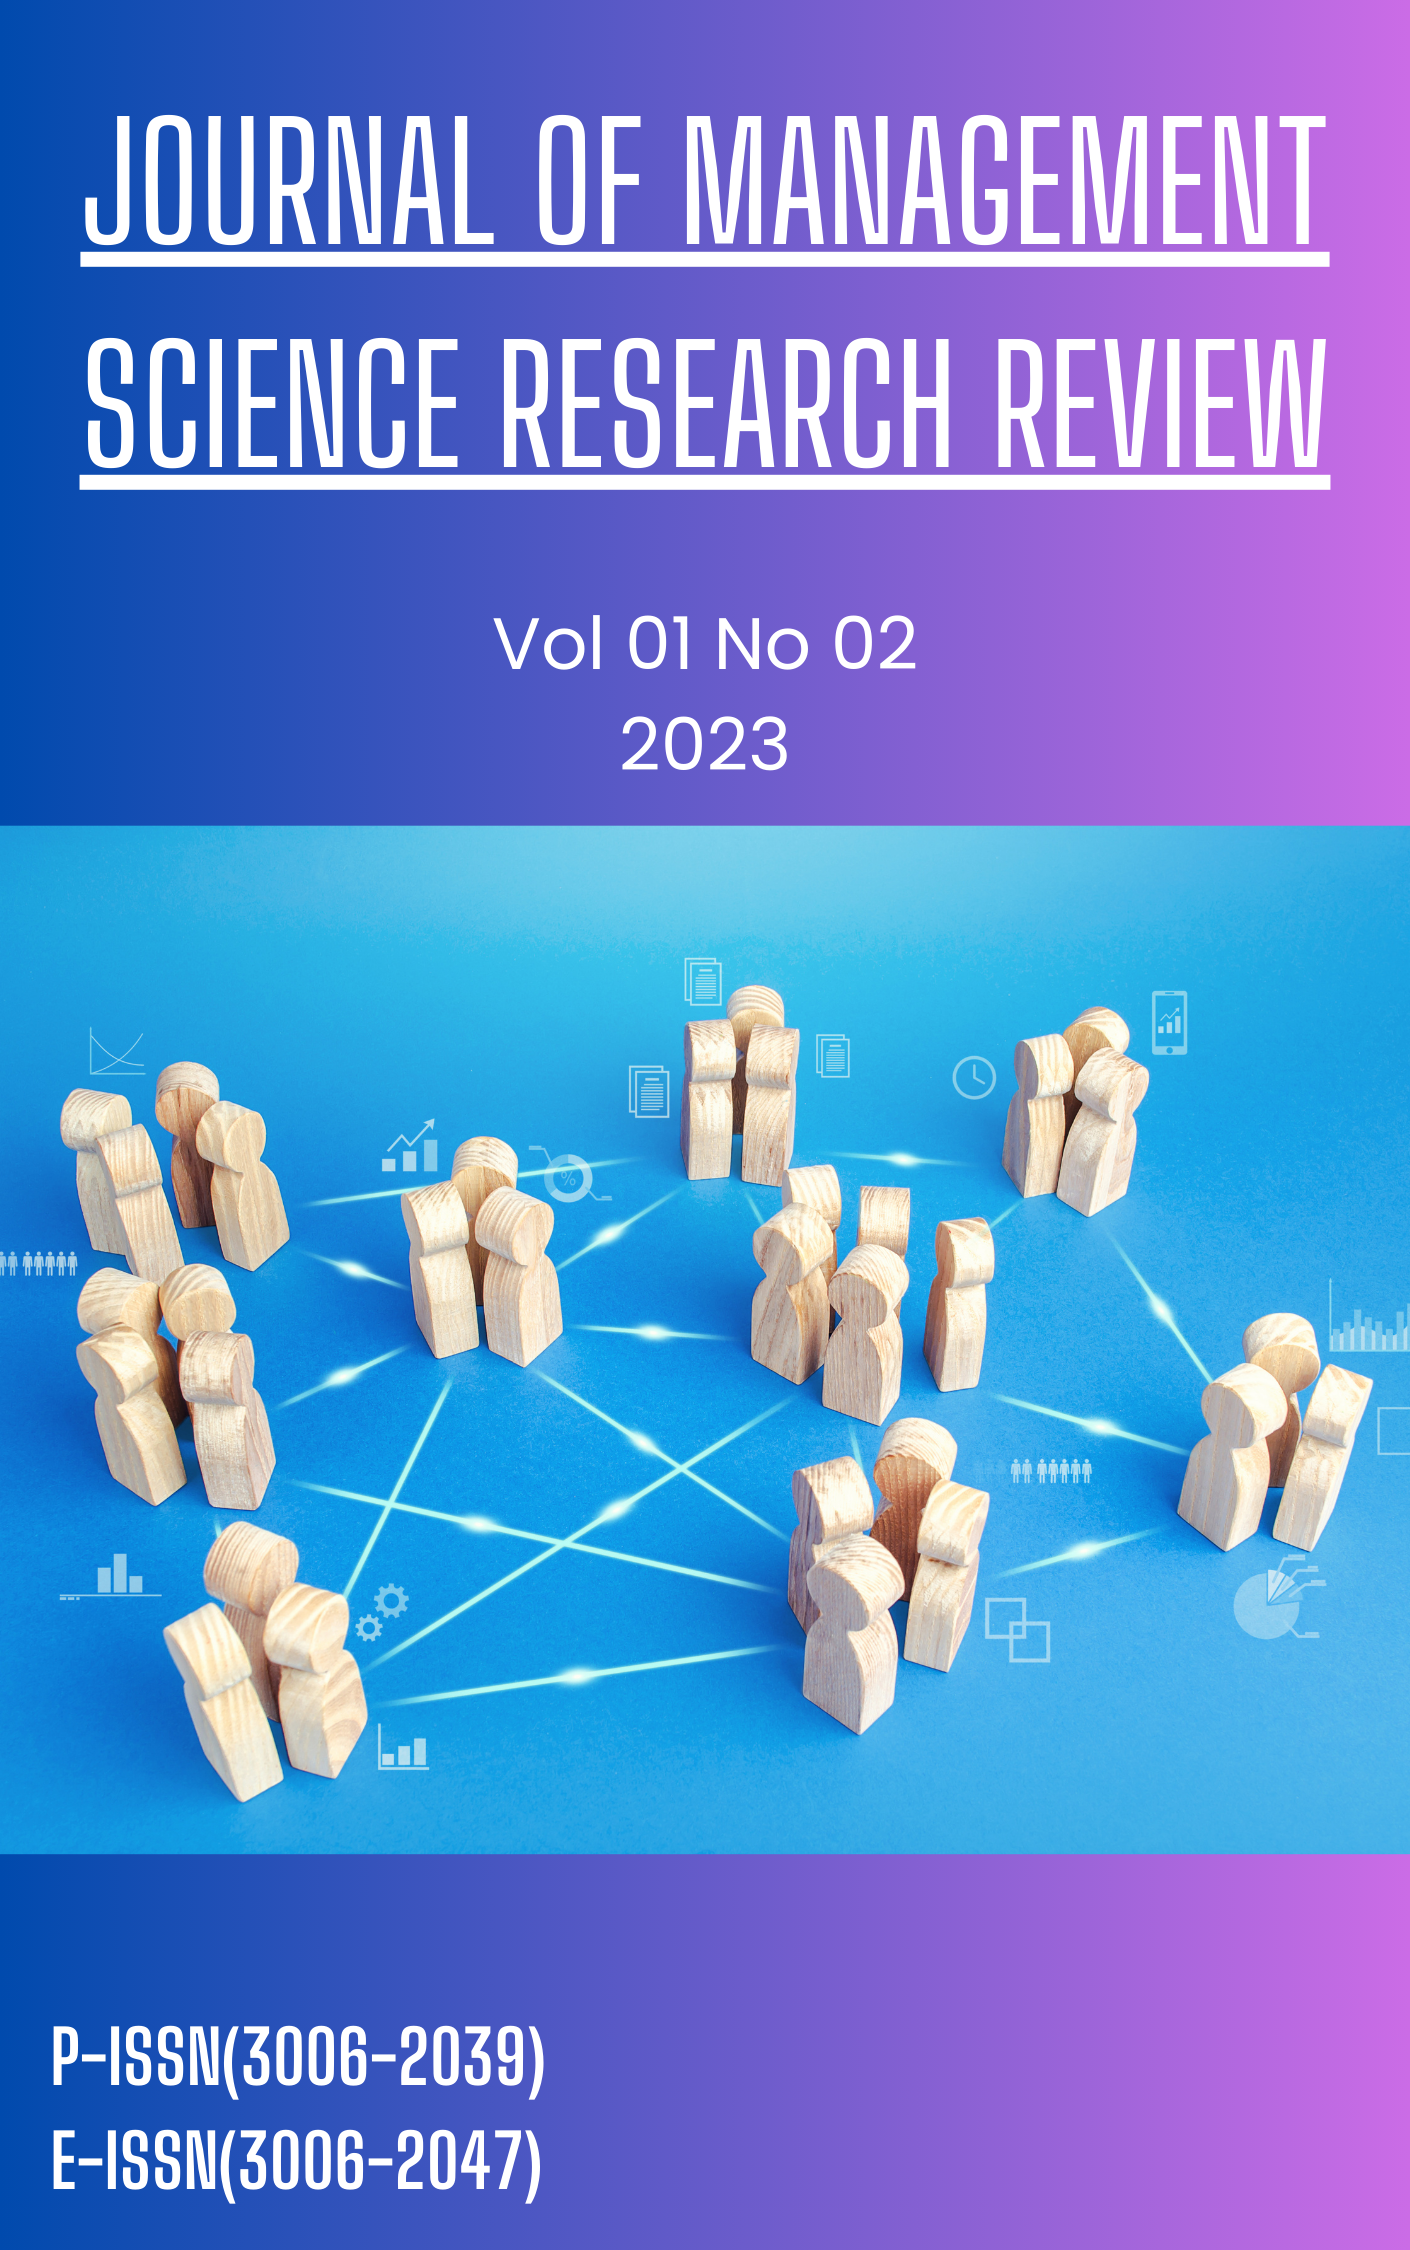 					View Vol. 1 No. 2 (2023): Journal of Management Science Research Review
				